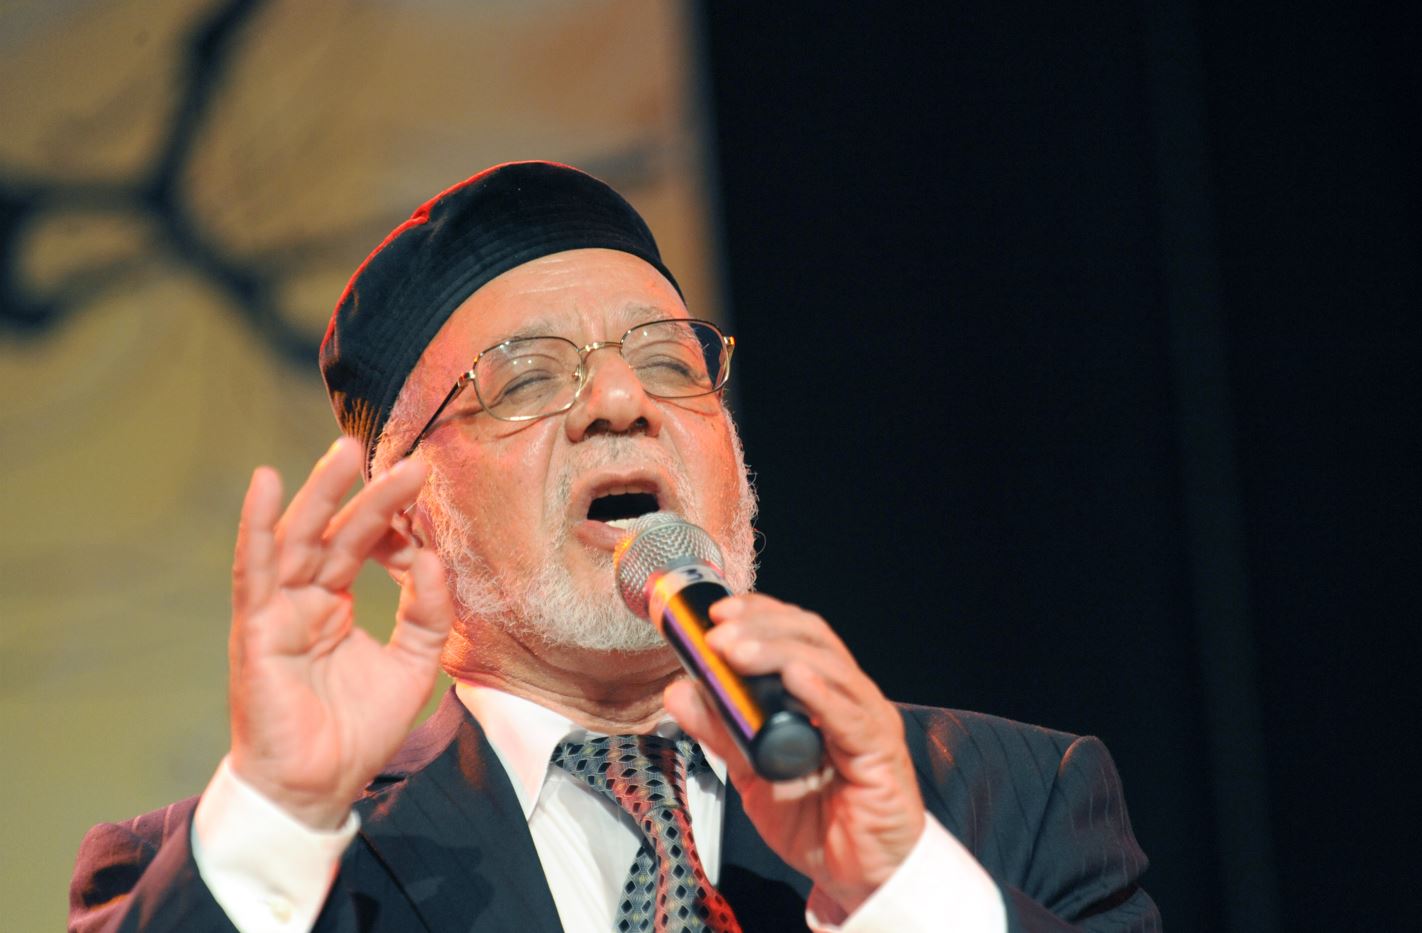 On October 29, 2009, Rabbi Haim Louk performs with the Moroccan orchestra Zyriab during the 6th festival of the Atlantic Andalusias in Essaouira, Morocco. Photo by Abdekhak Senna/AFP via Getty Images.
